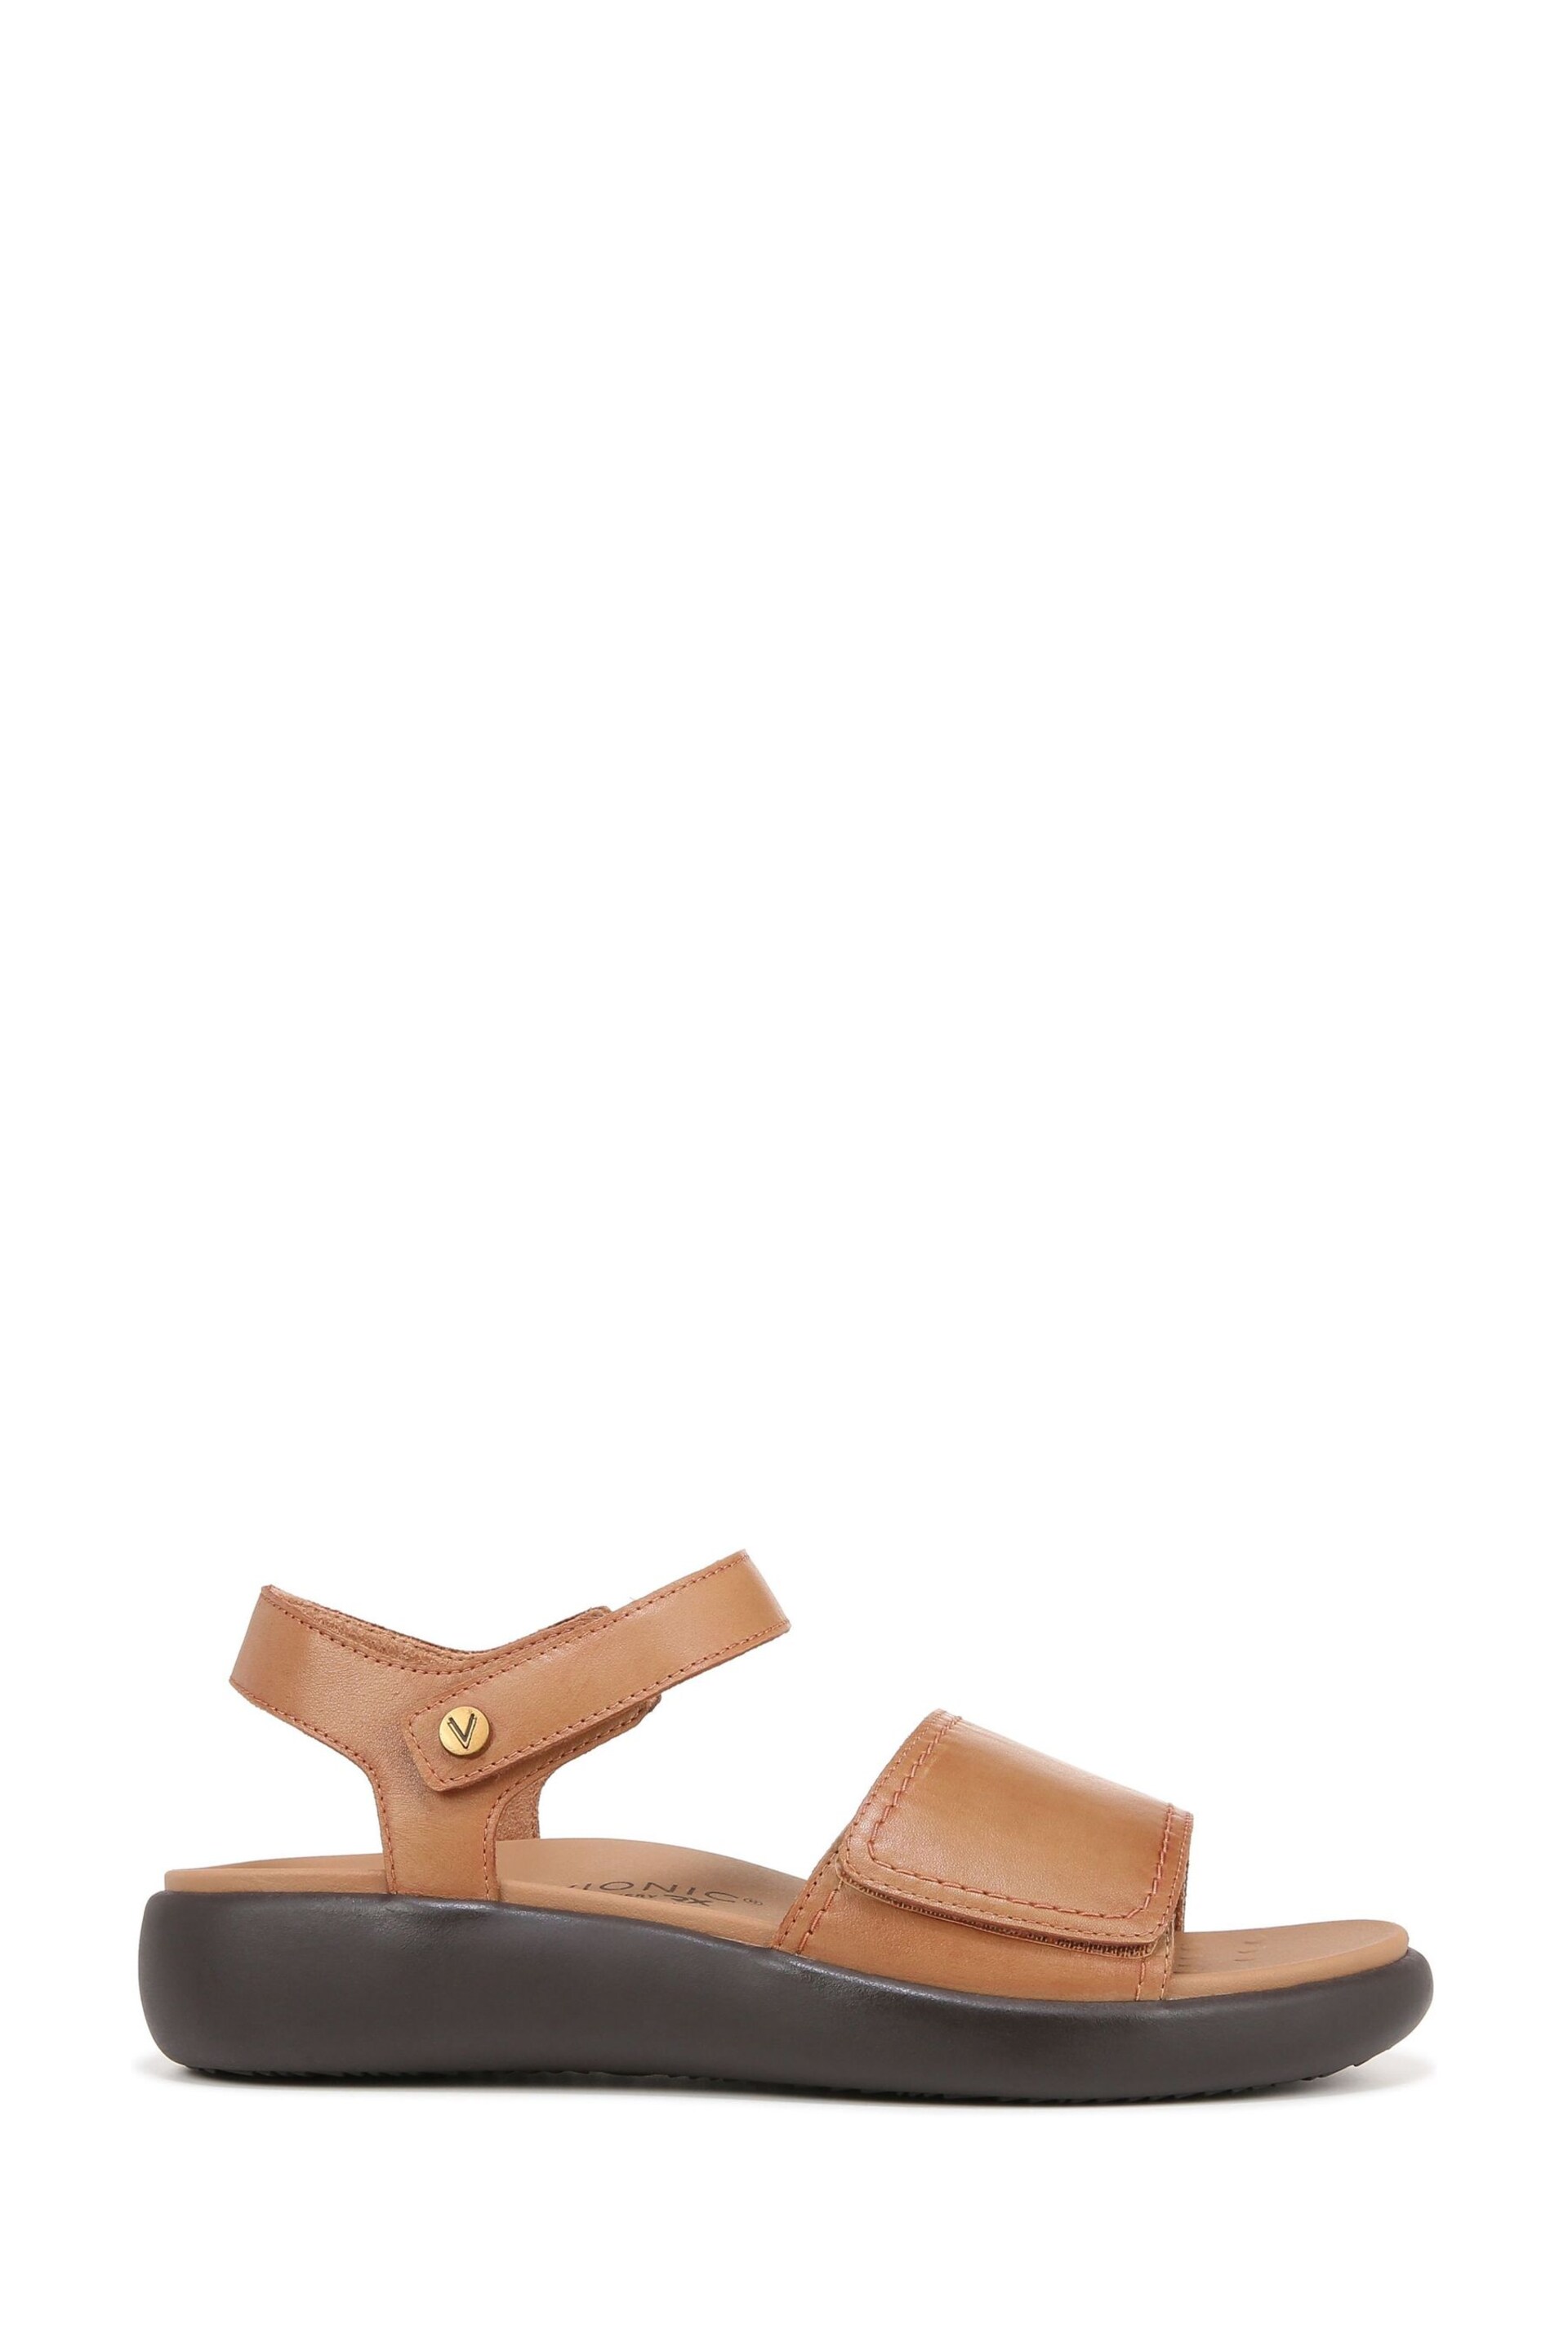 Vionic Awaken Wide Fit Ankle Strap Sandals - Image 1 of 7